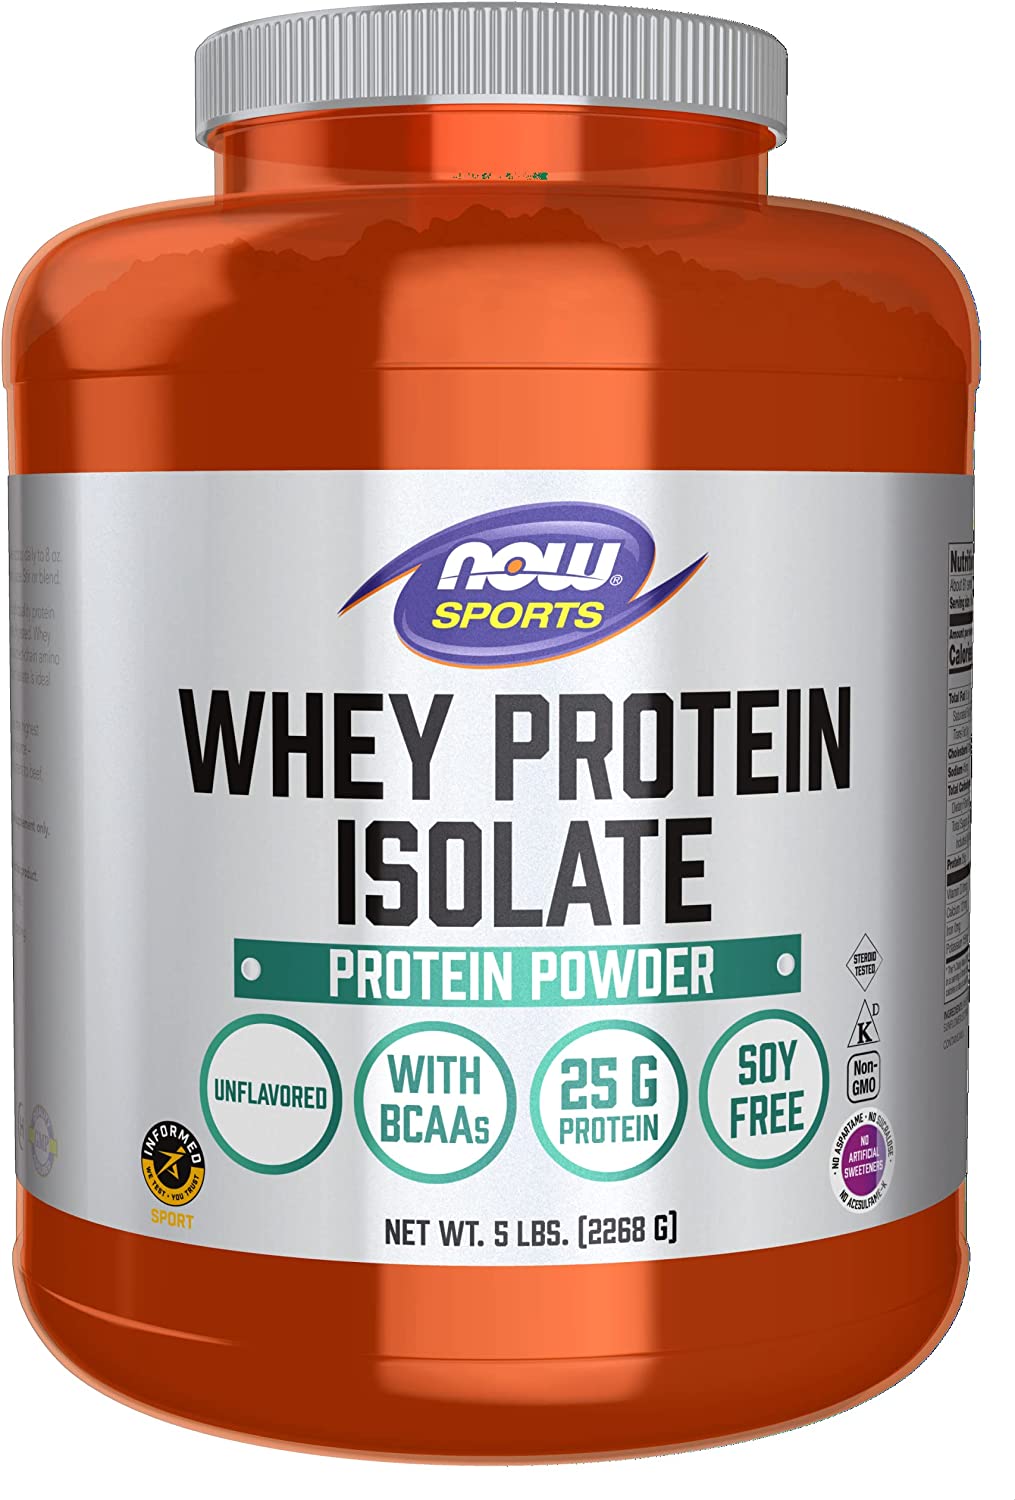 NOW Sports Nutrition, Whey Protein Isolate, 25 g With BCAAs, Unflavored Powder, 5-Pound